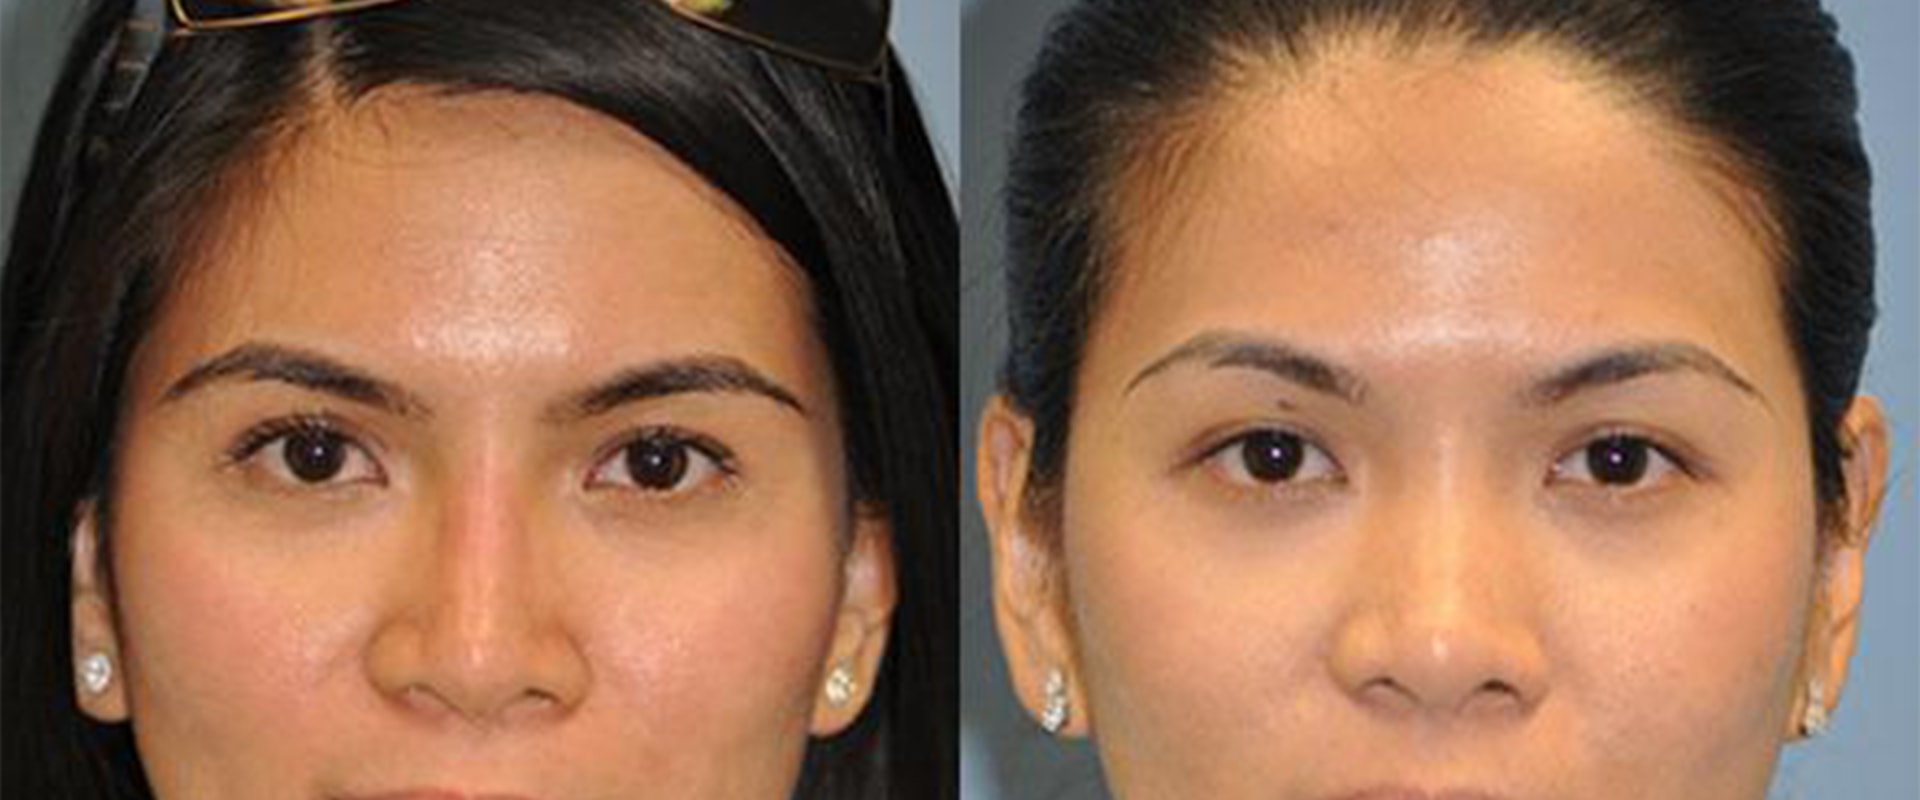 The Truth About Non-Surgical Rhinoplasty